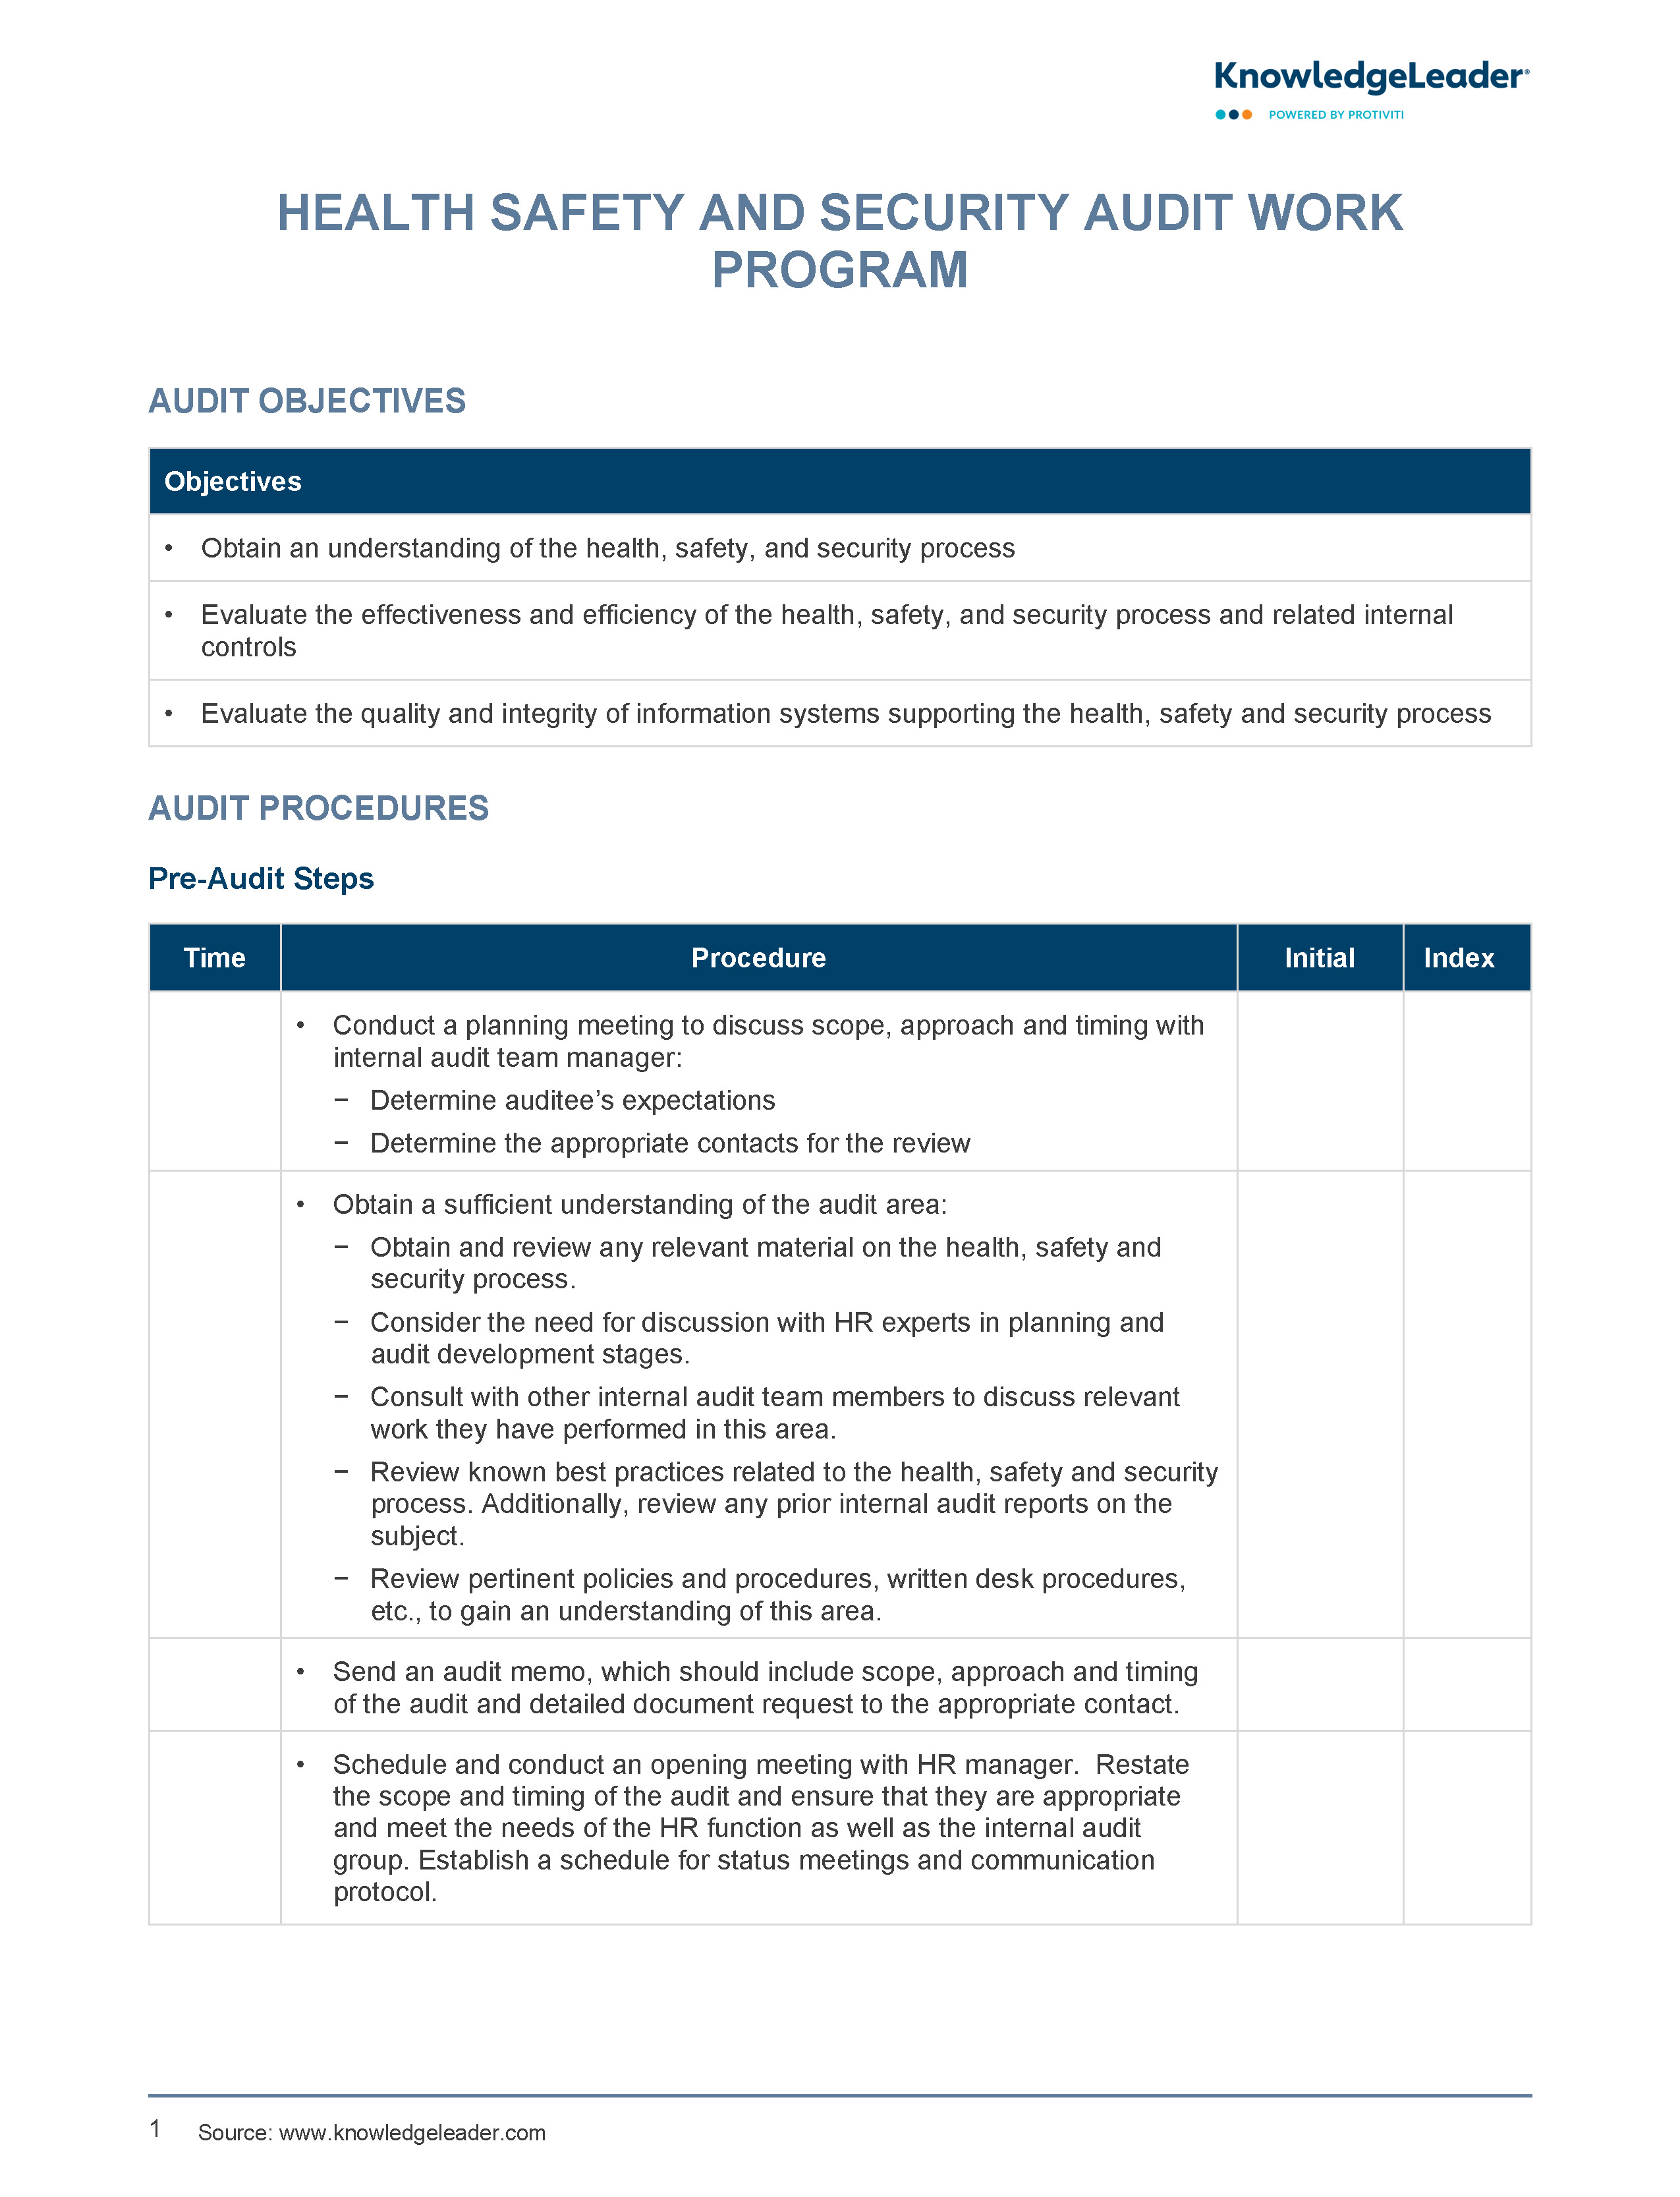 screenshot of the first page of Health, Safety and Security Audit Work Program